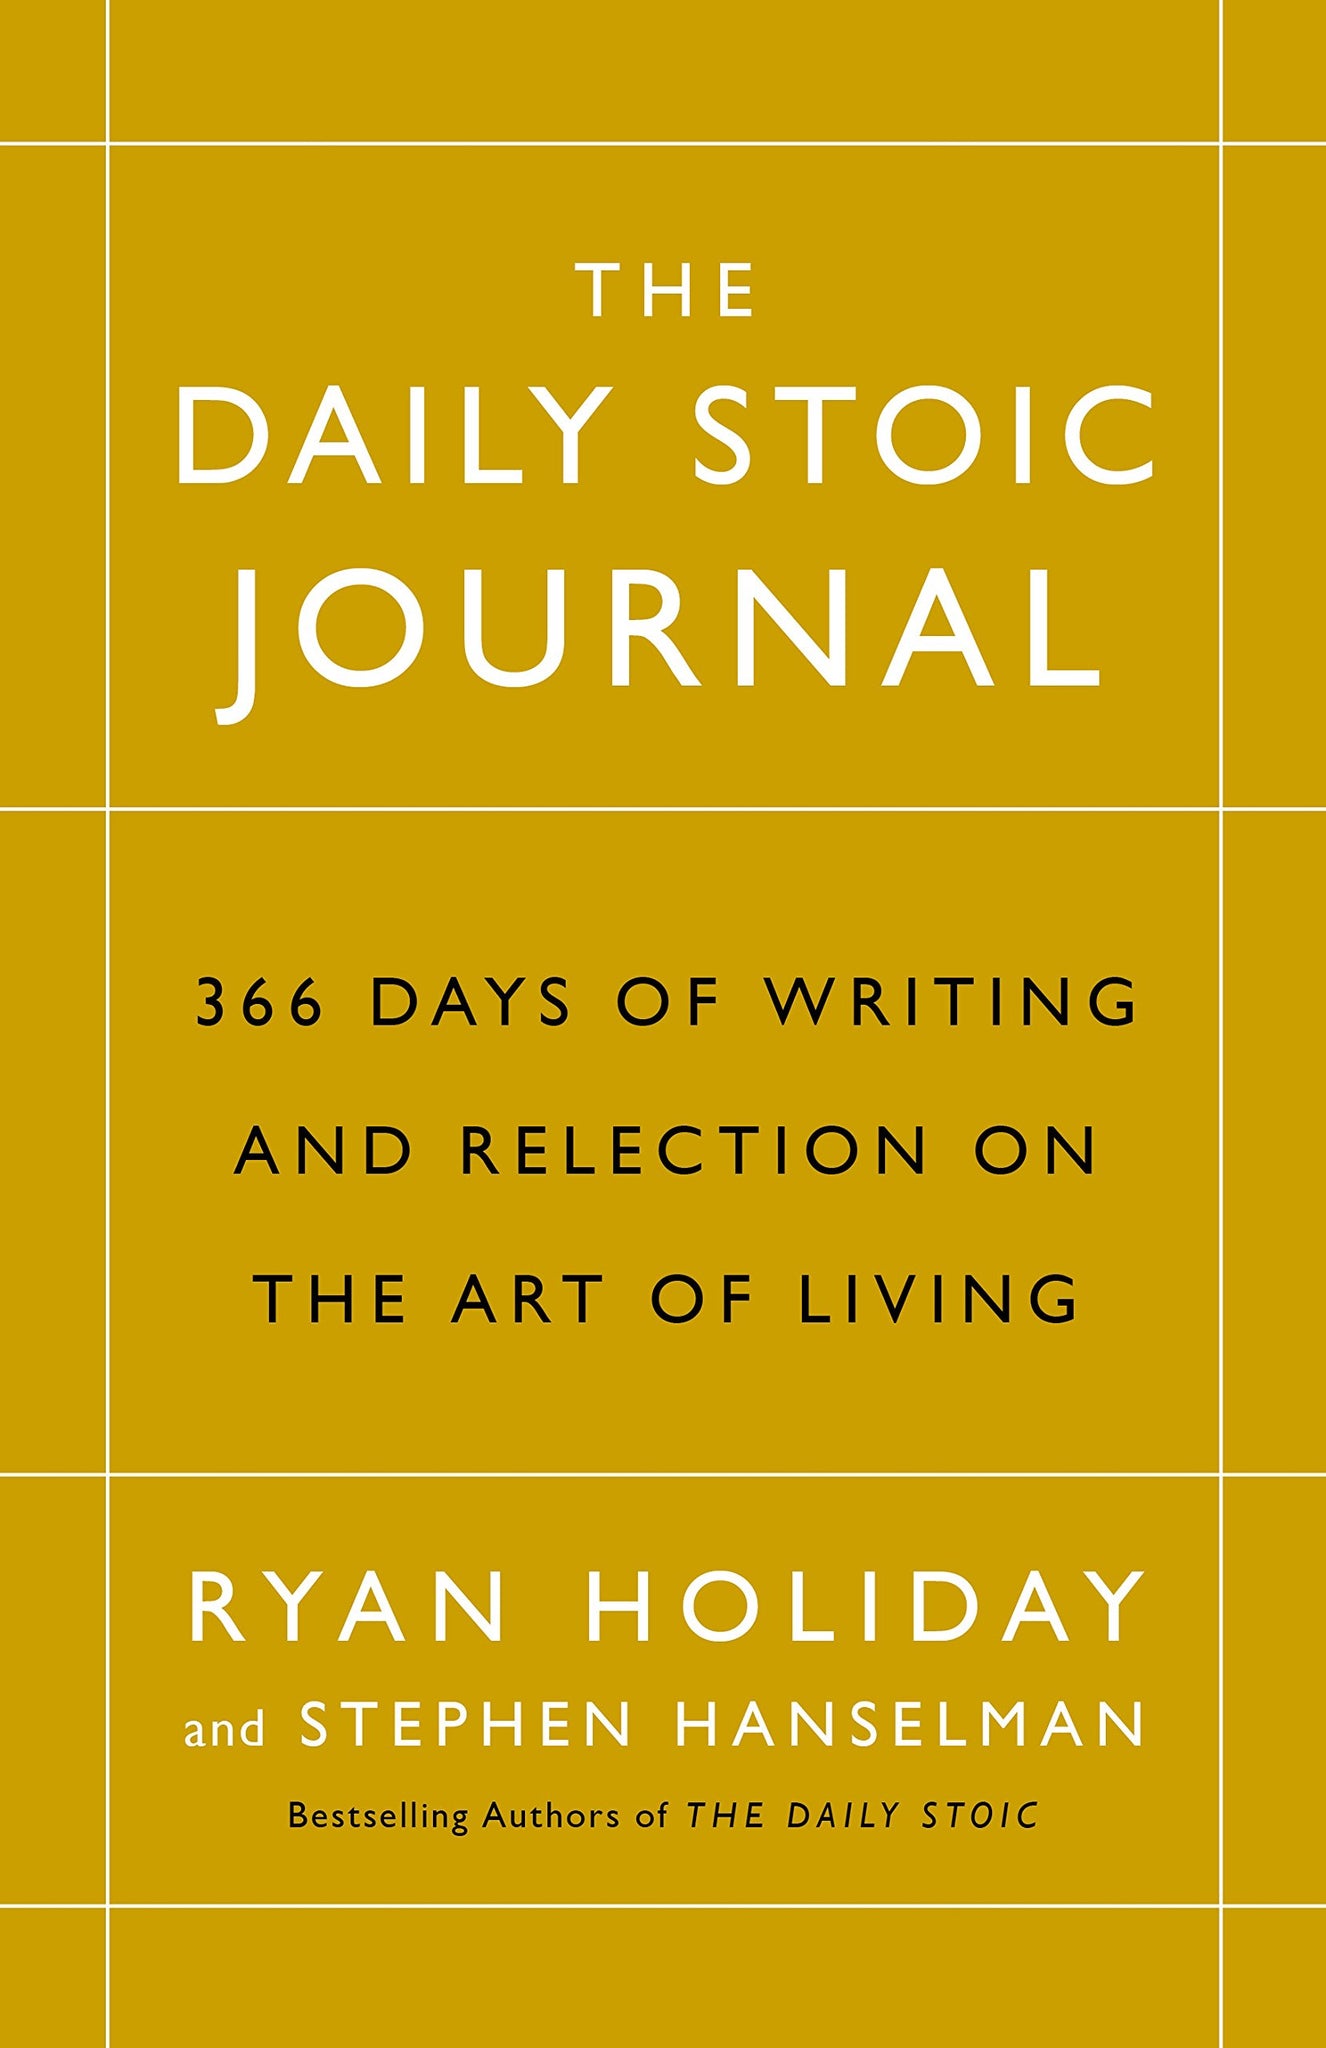 The Daily Stoic Journal by Ryan Holiday, Stephen Hanselman